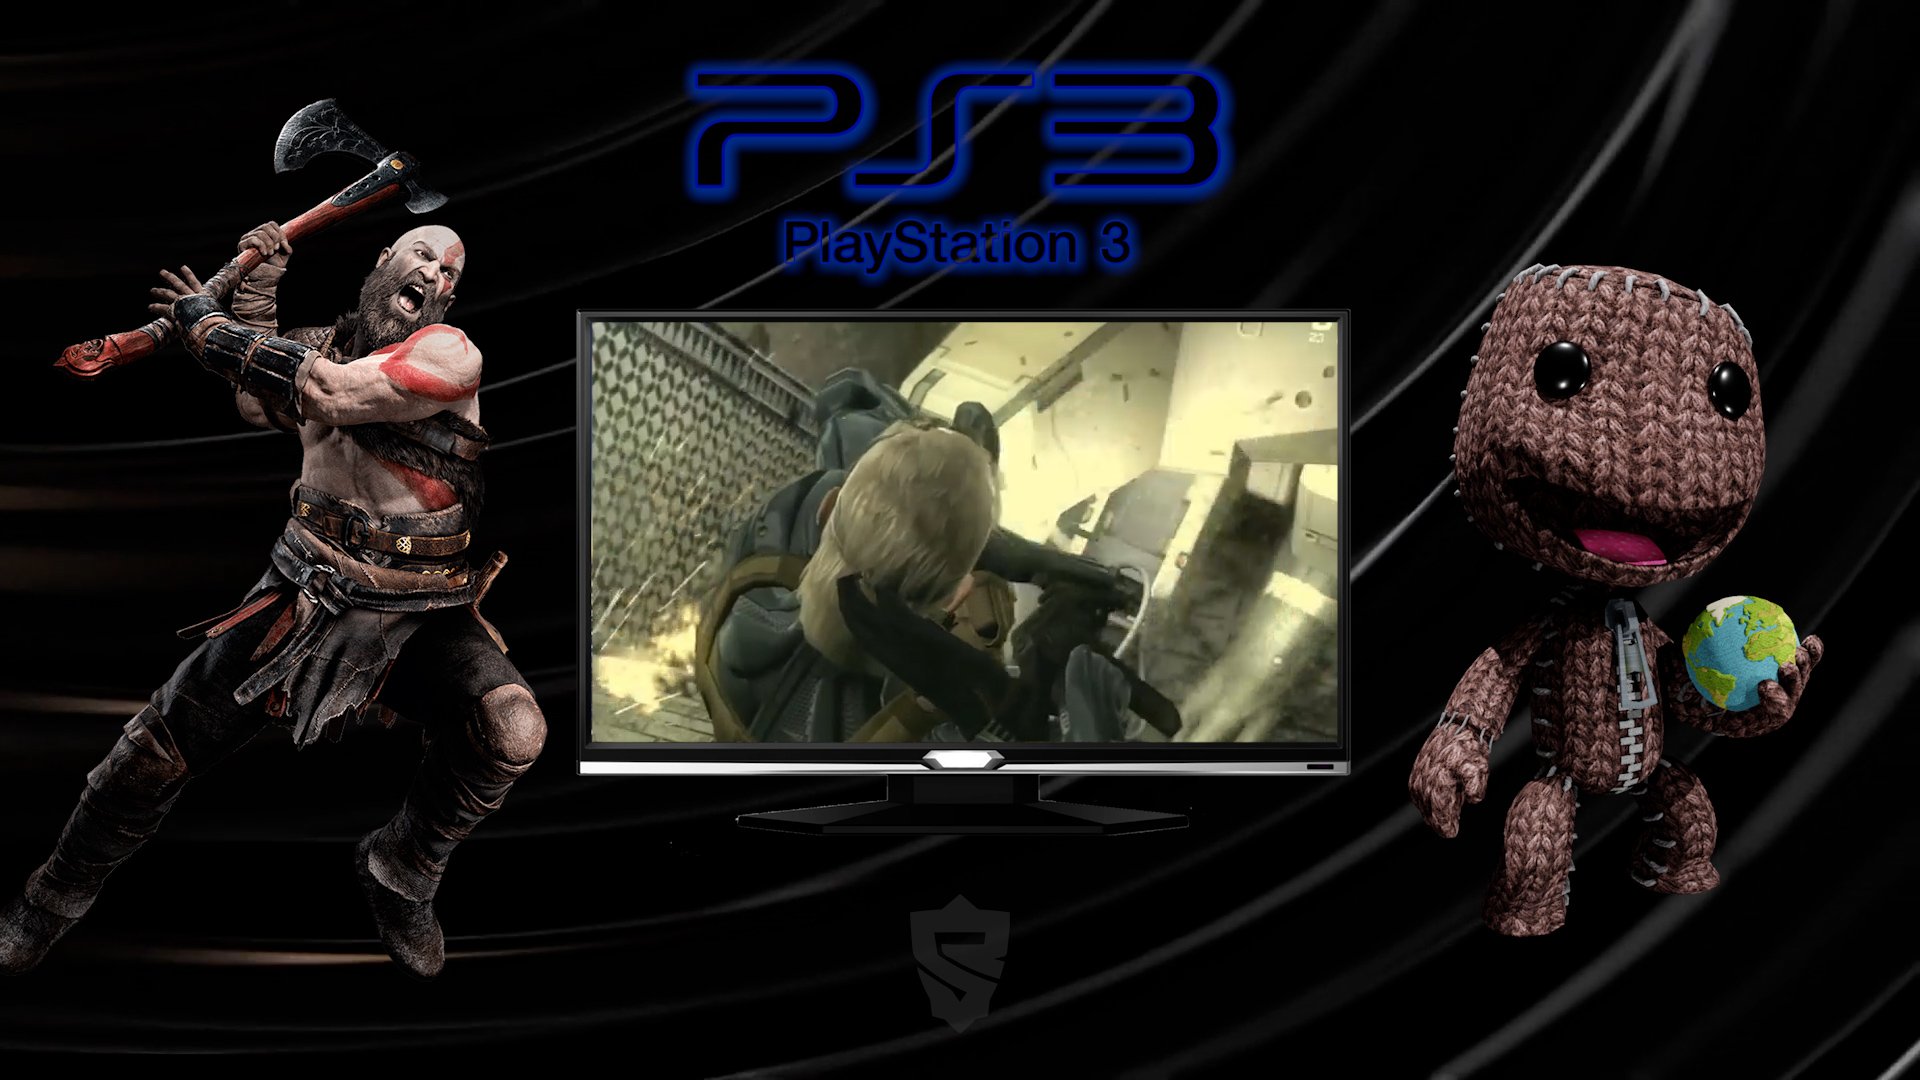 More information about "PS3 HD Platform Video"